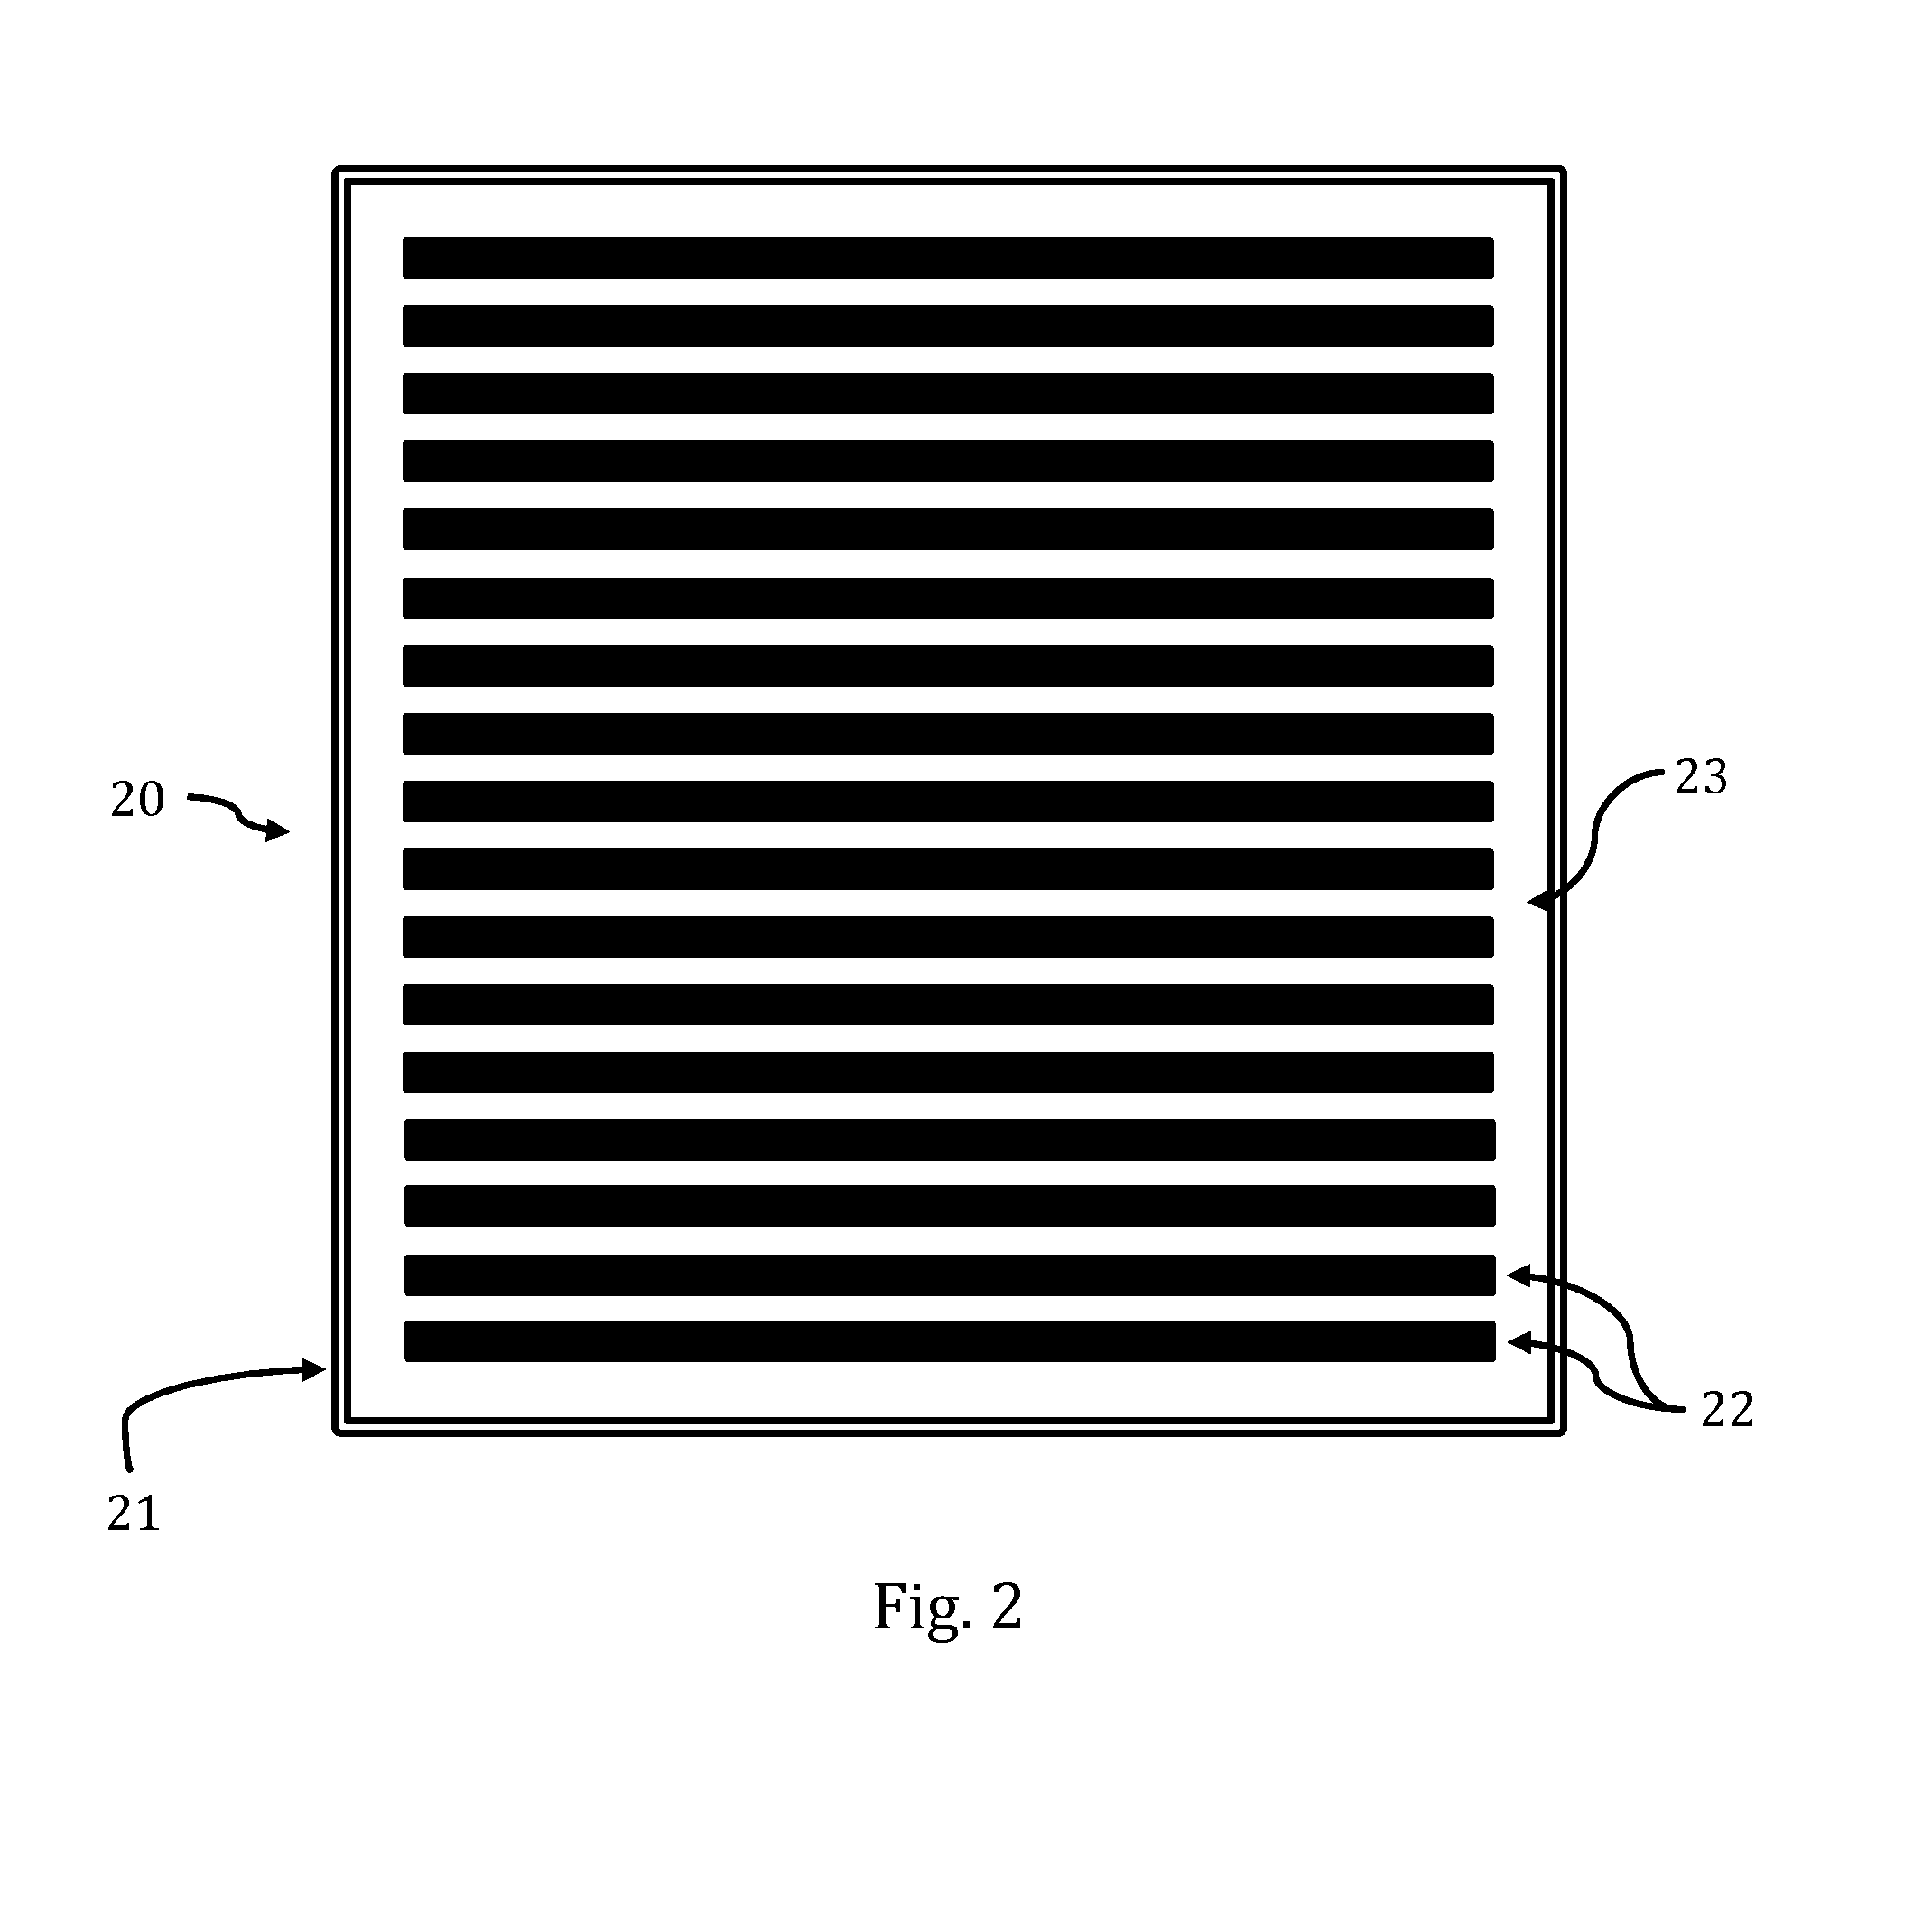 Method and Apparatus for Monitoring a Charged Particle Beam